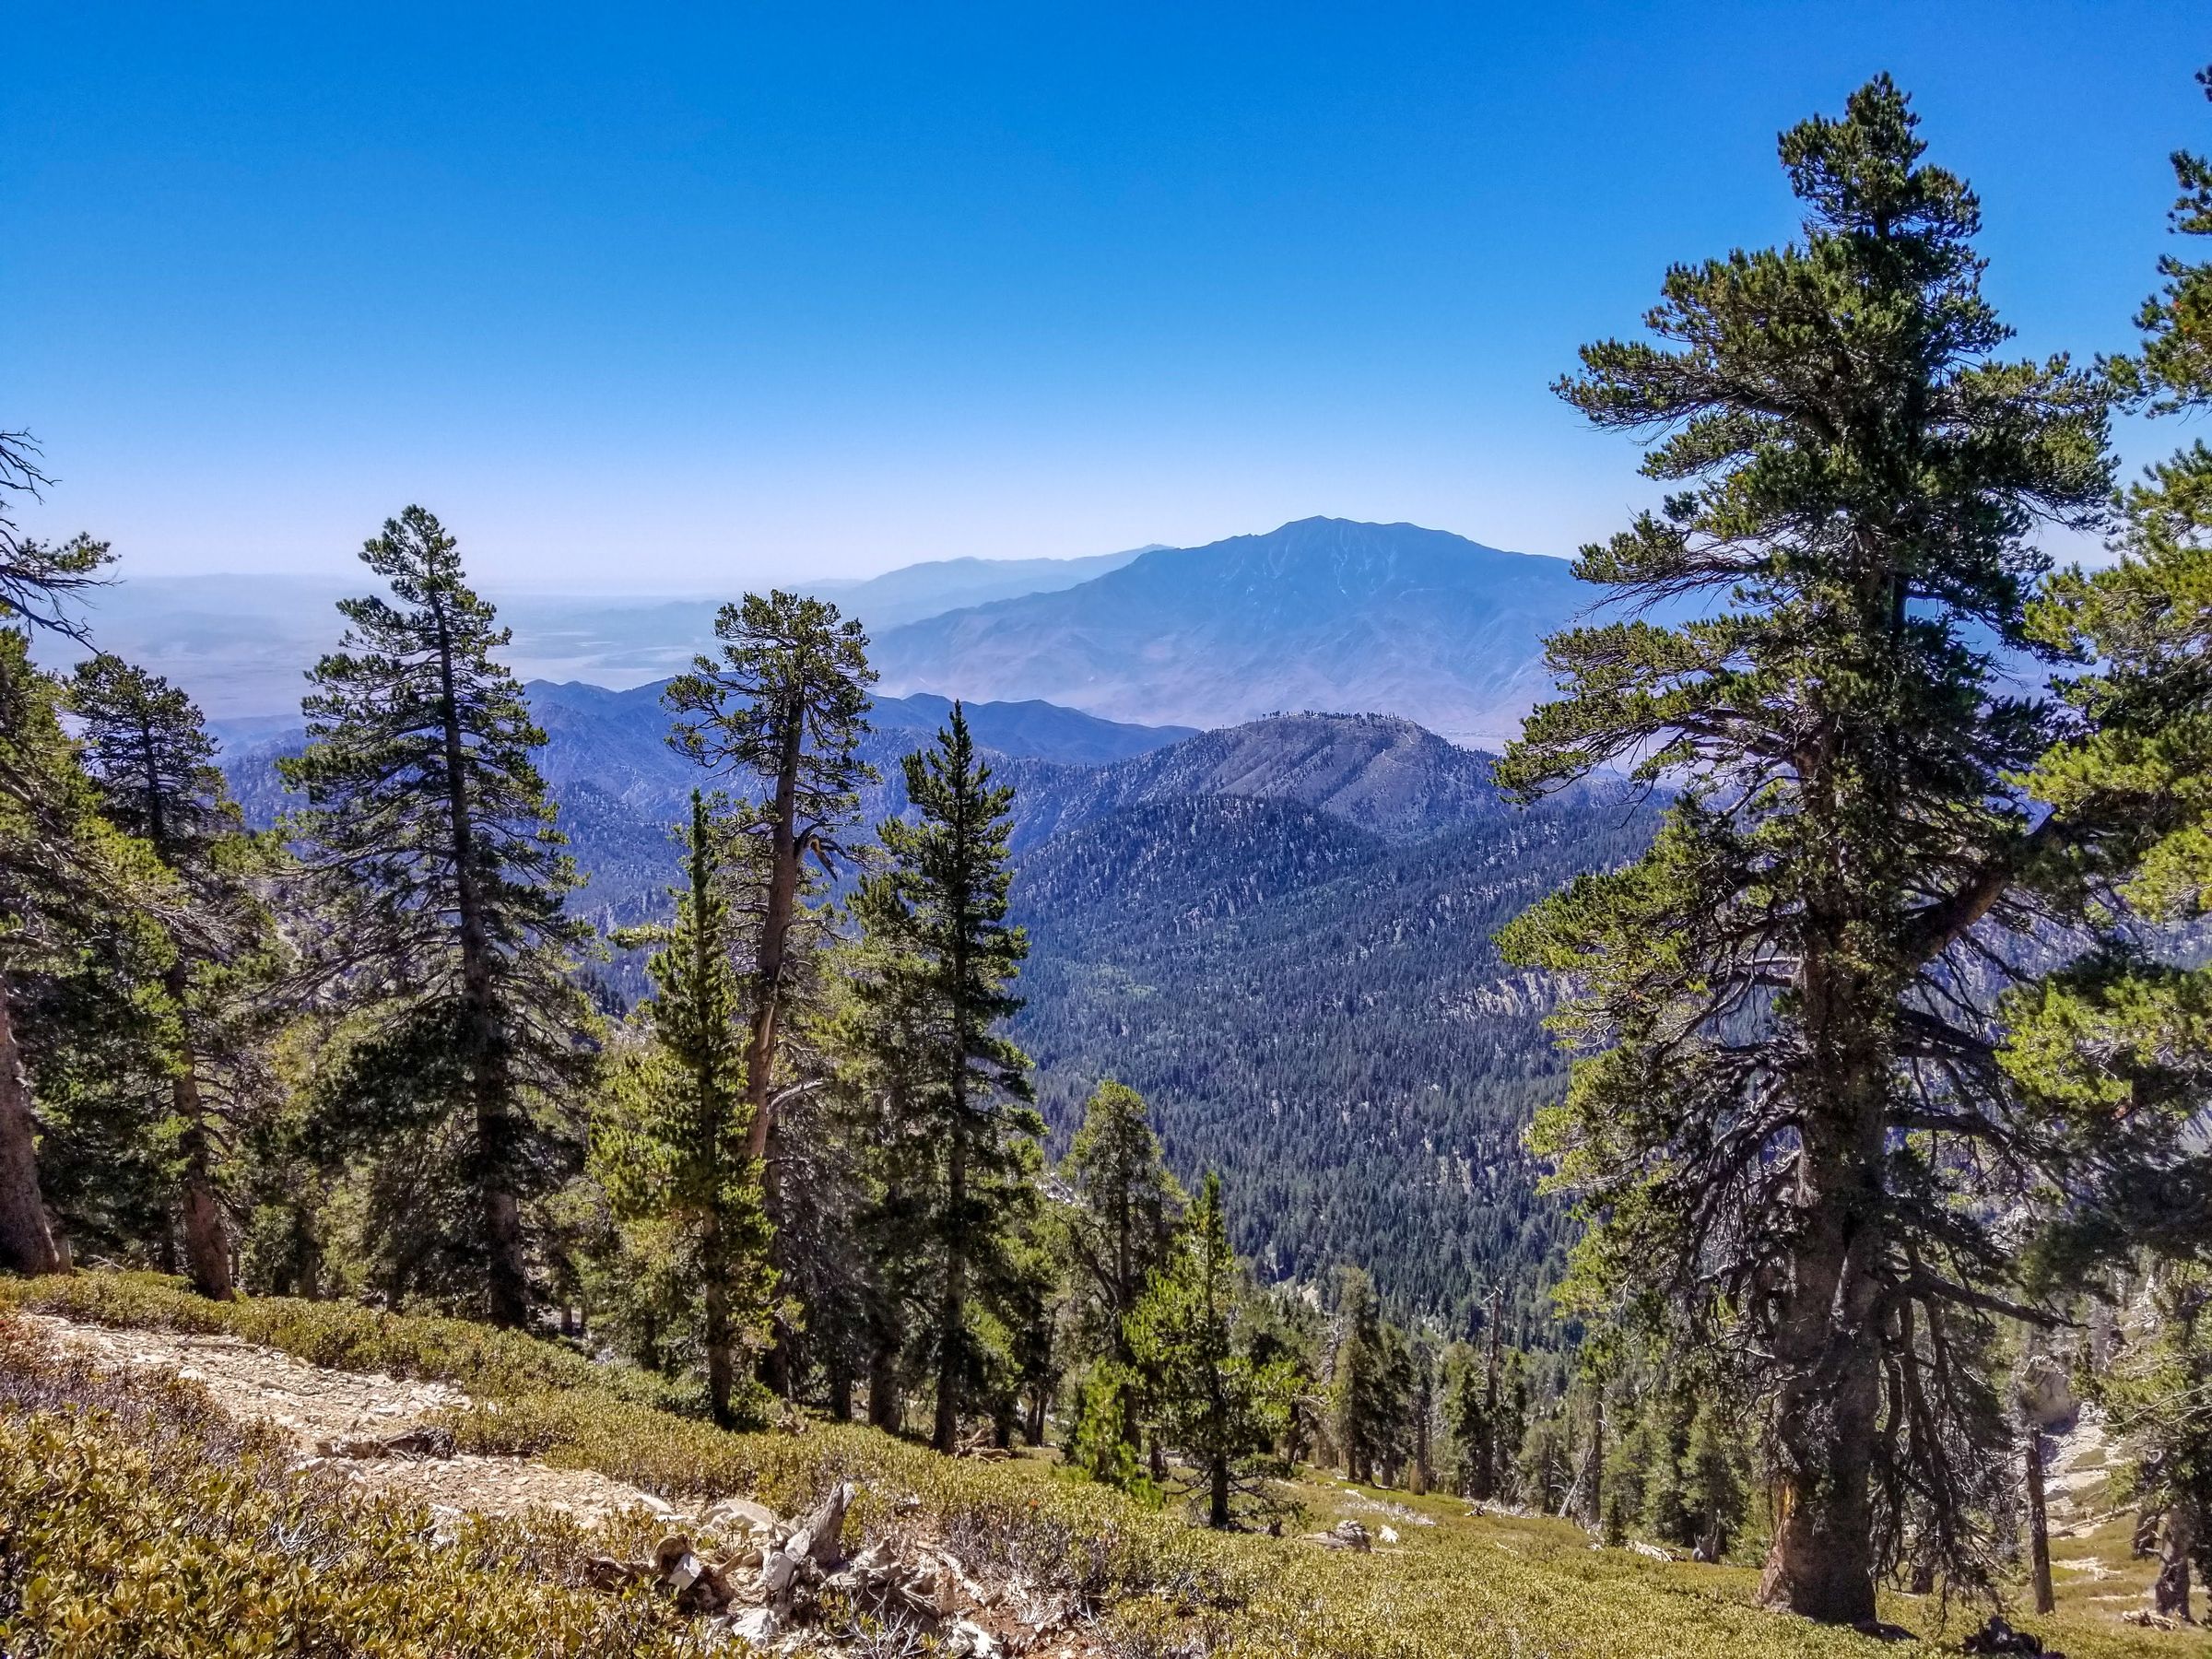 Mount San Jacinto as seen about a mile above High Creek Camp